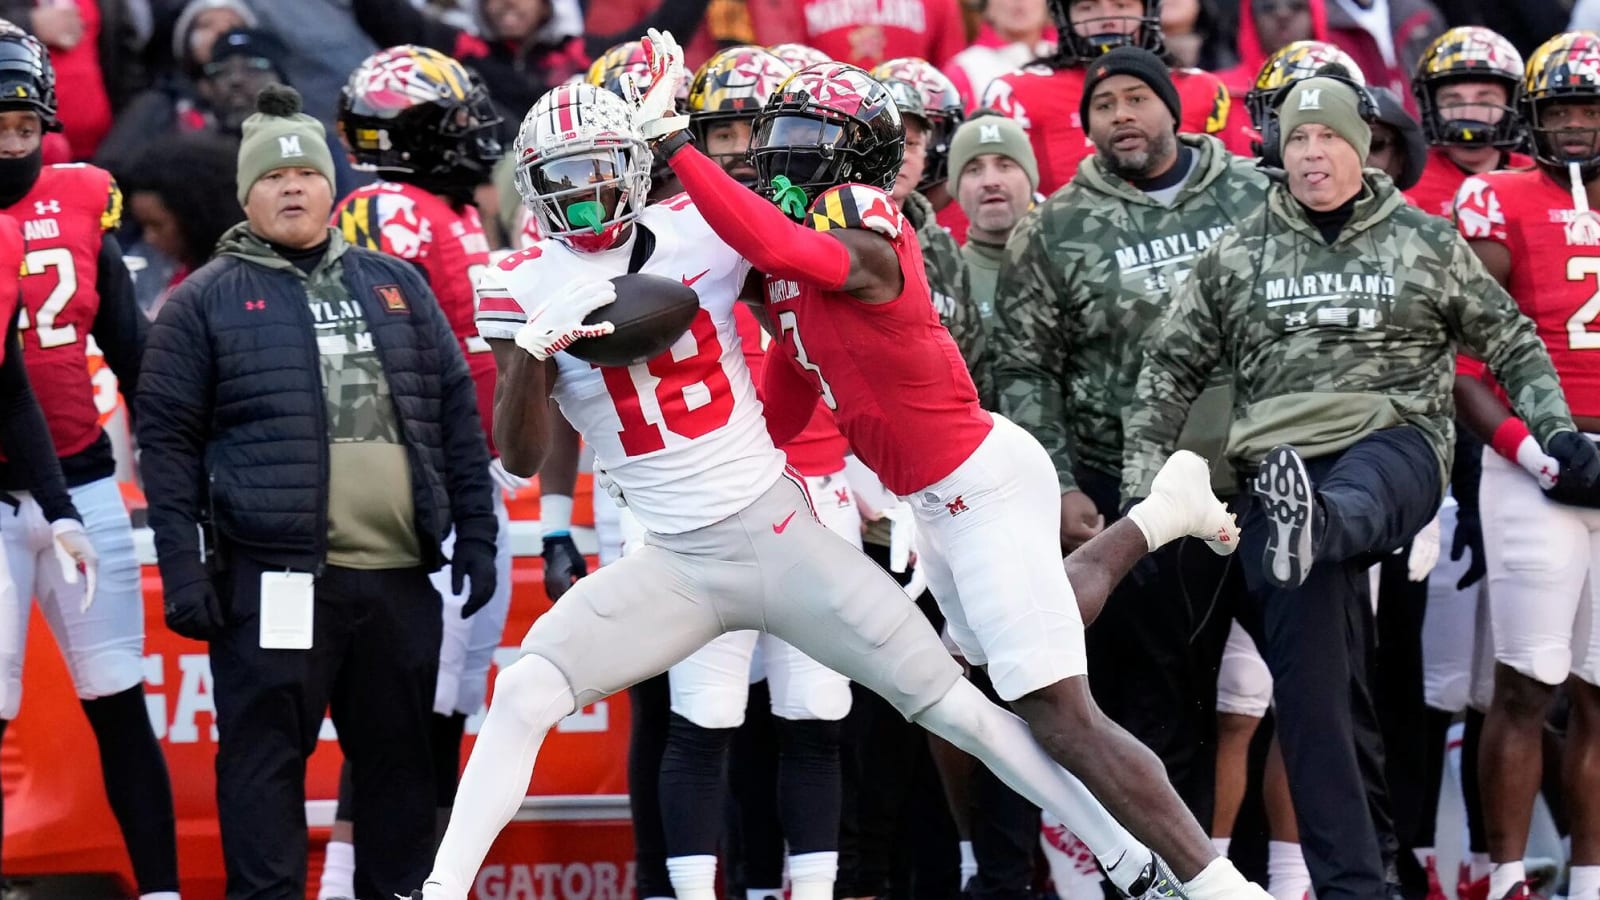 Watch: Ohio State's Harrison Jr. makes ridiculous one-handed catch